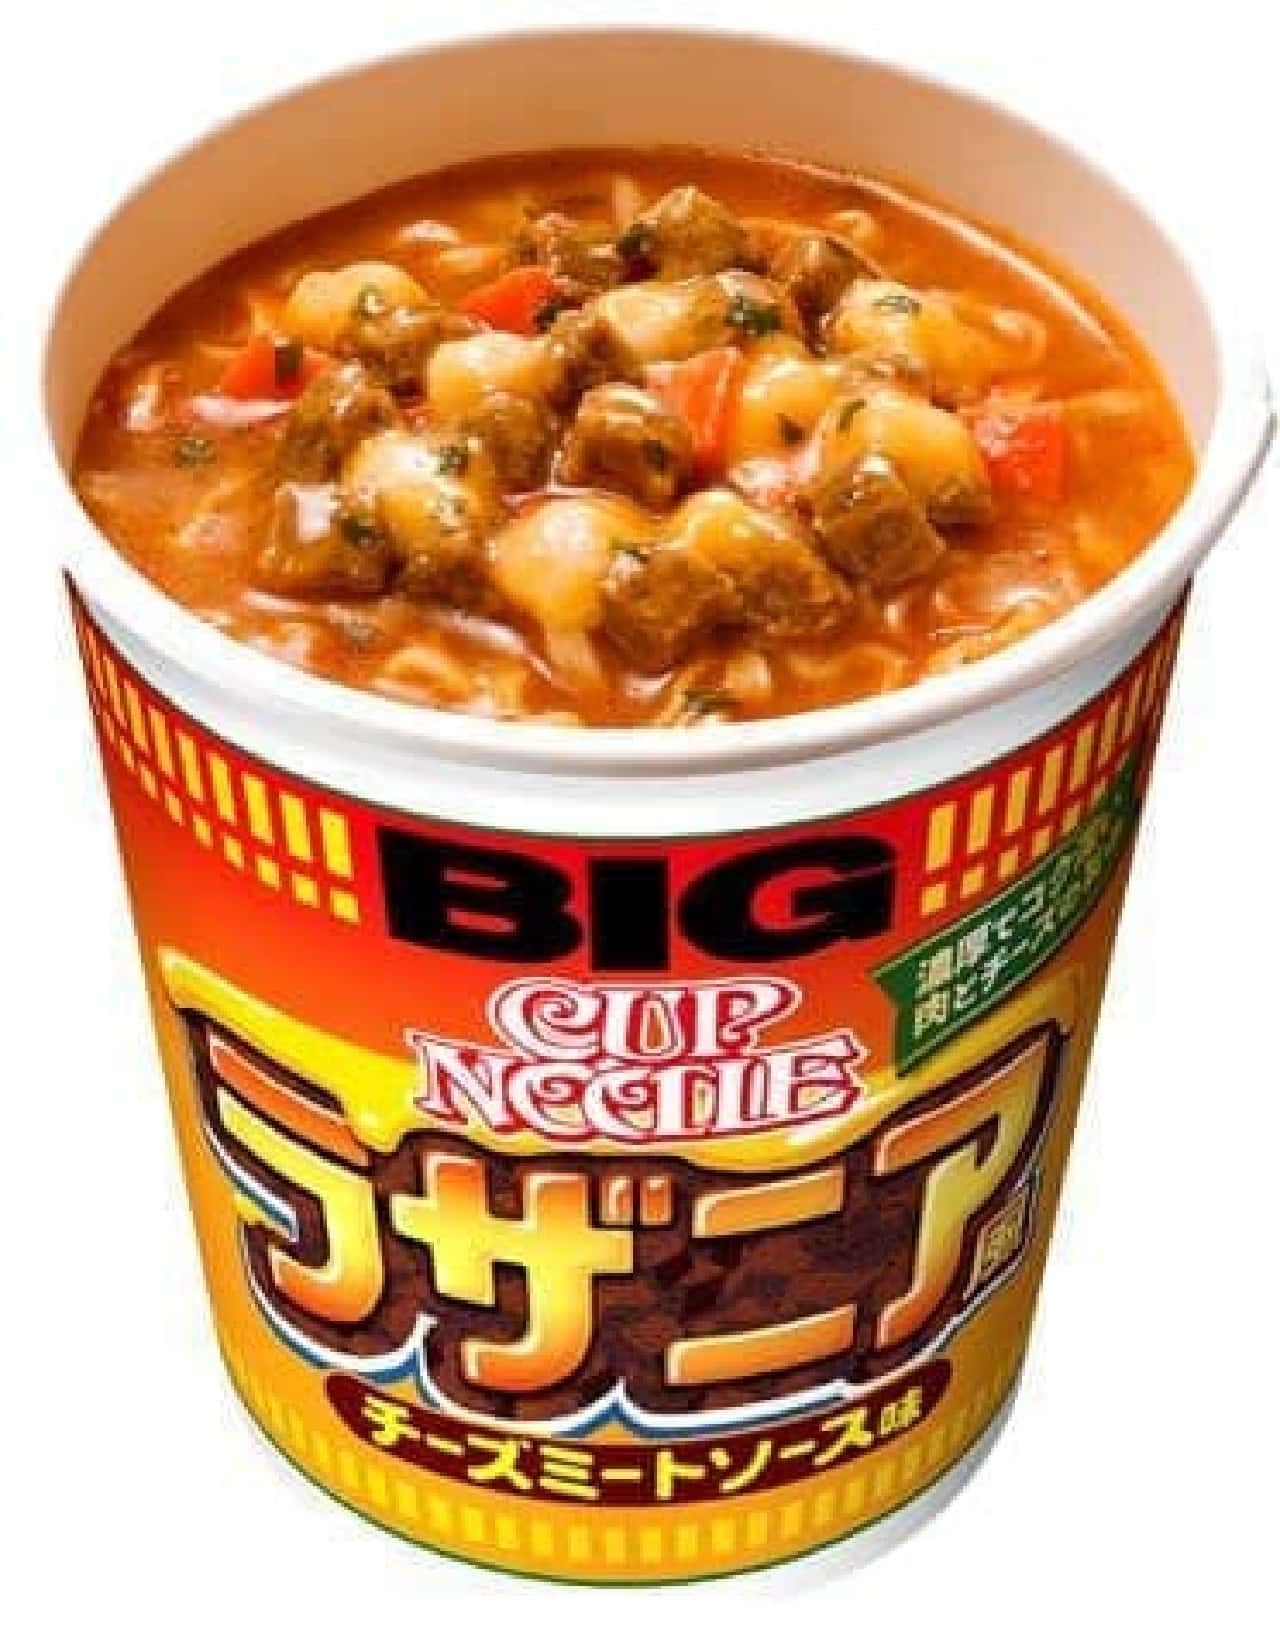 Nissin Foods "Cup Noodle Lasagna-style Cheese Meat Sauce Flavor Big"